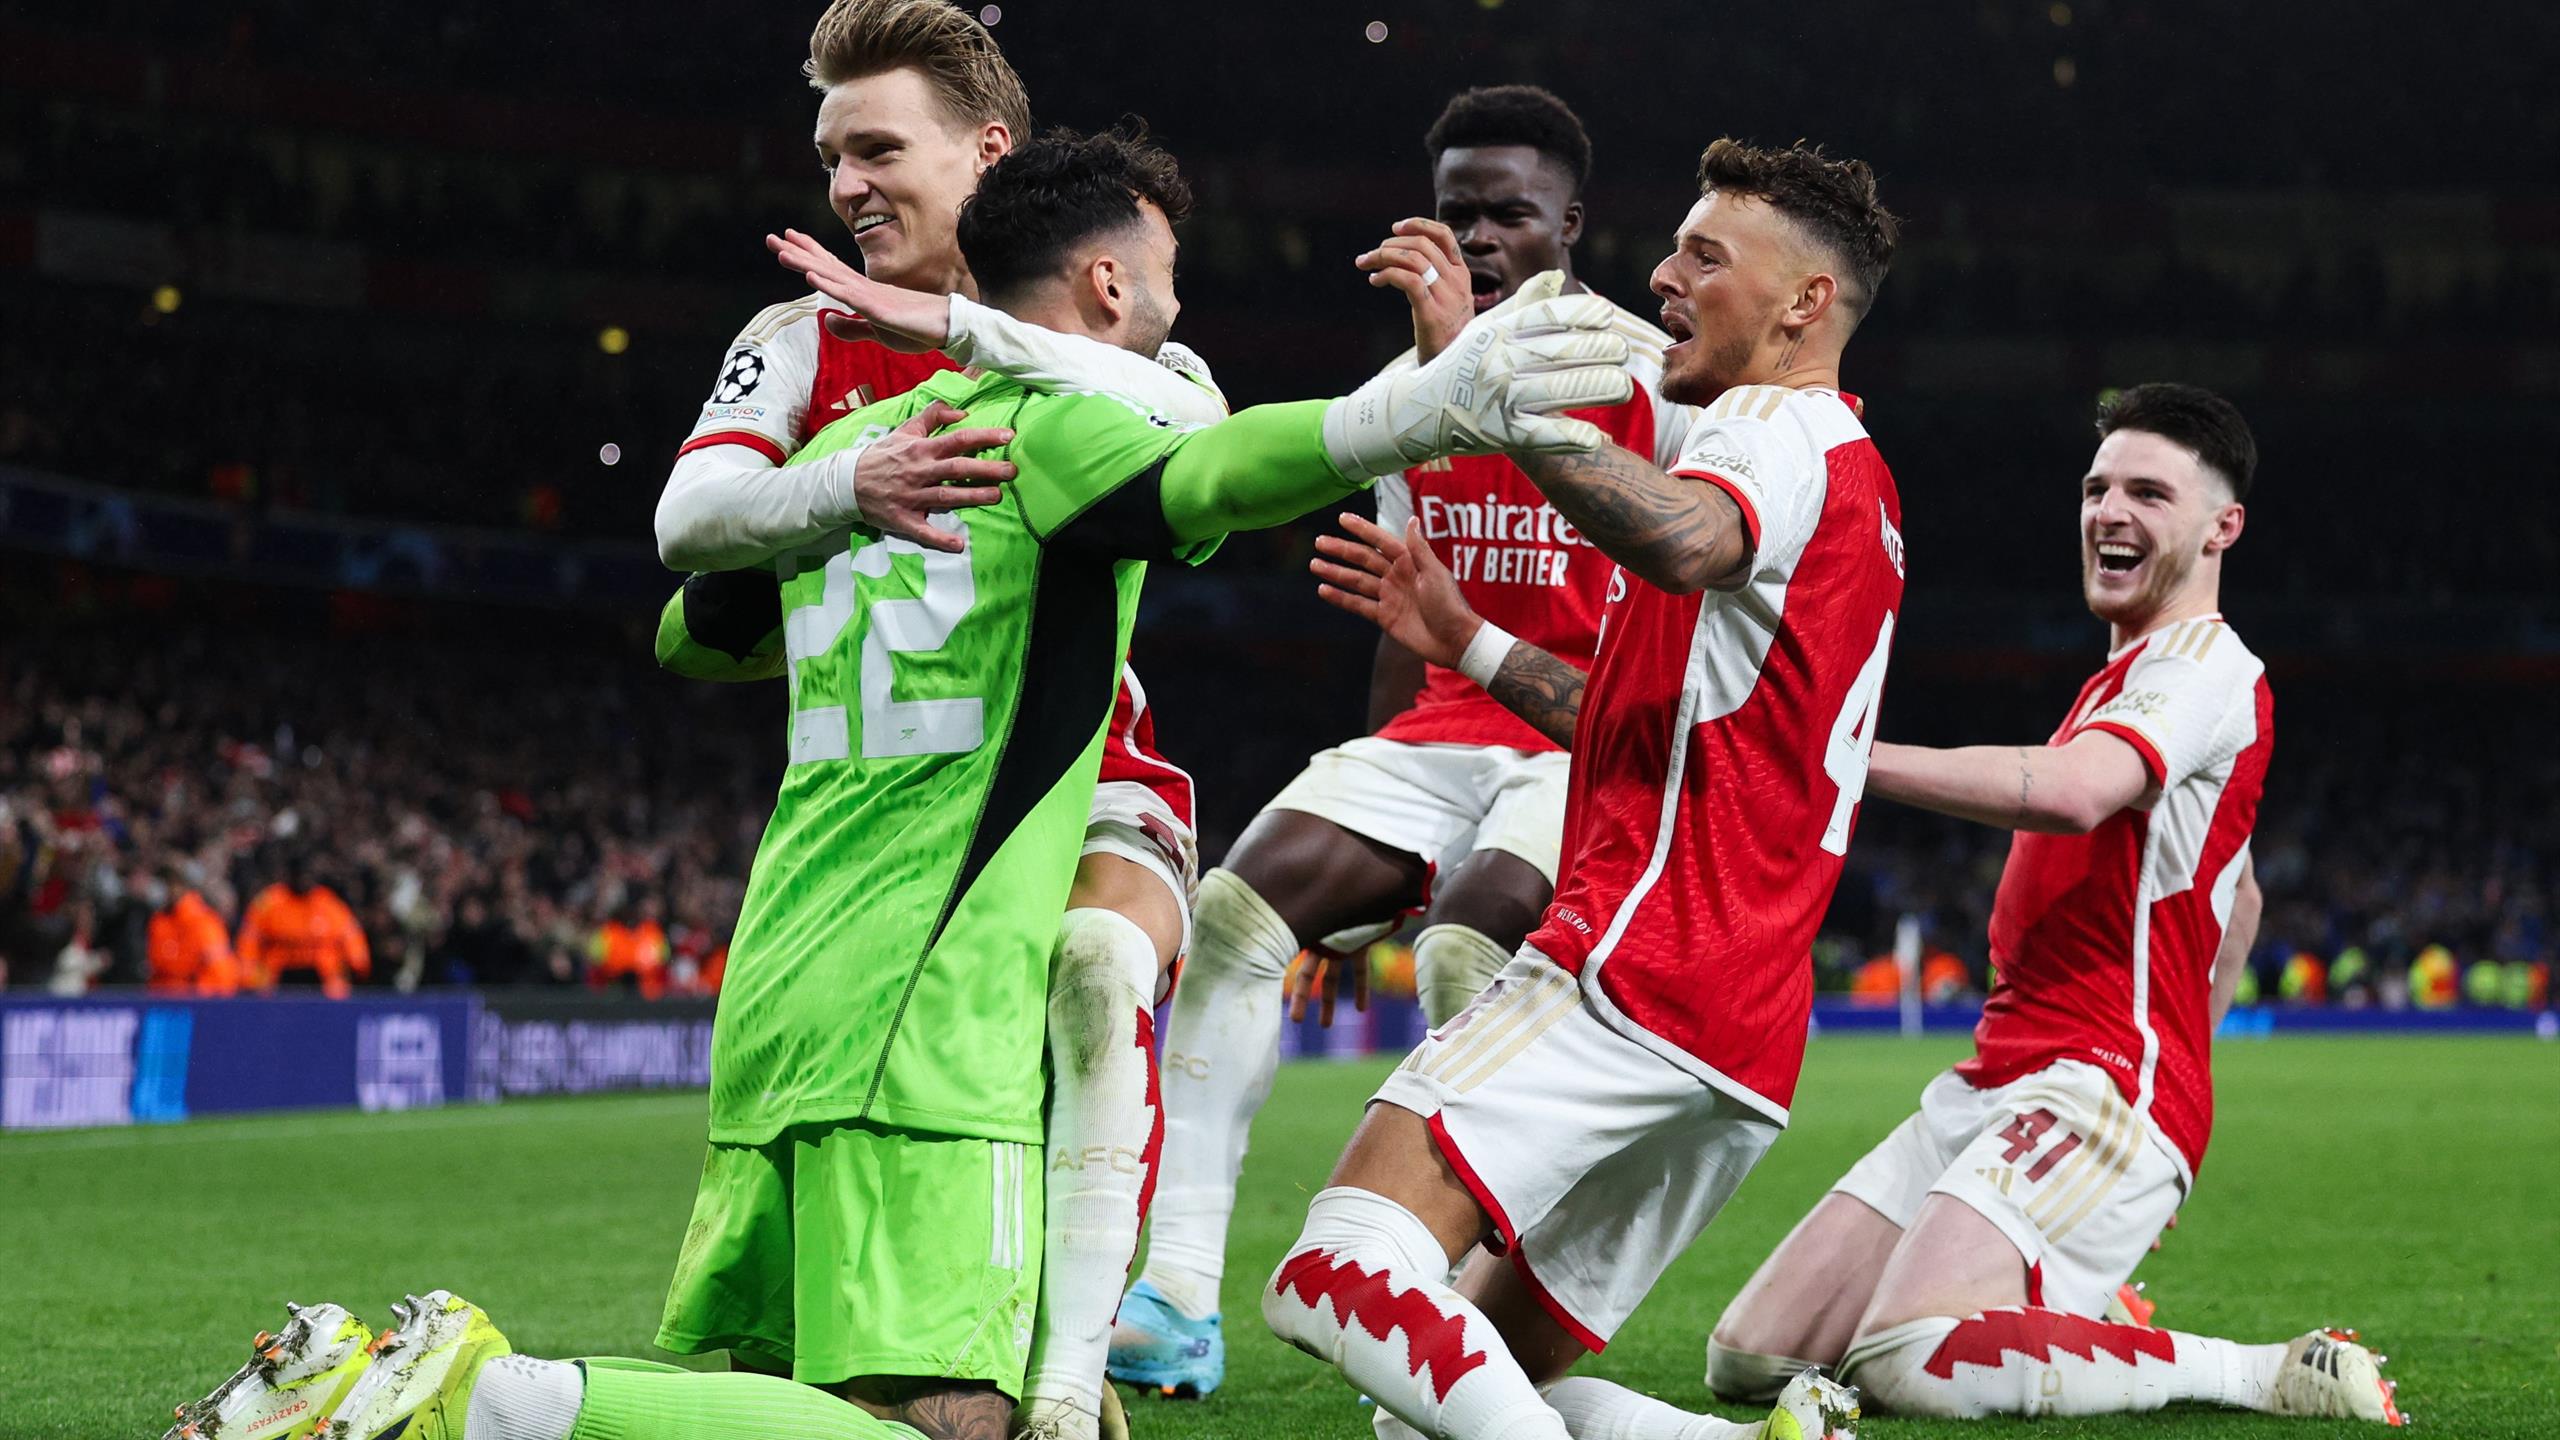 Arsenal progress to quarterfinals through penalty shootout win over Porto in UCL